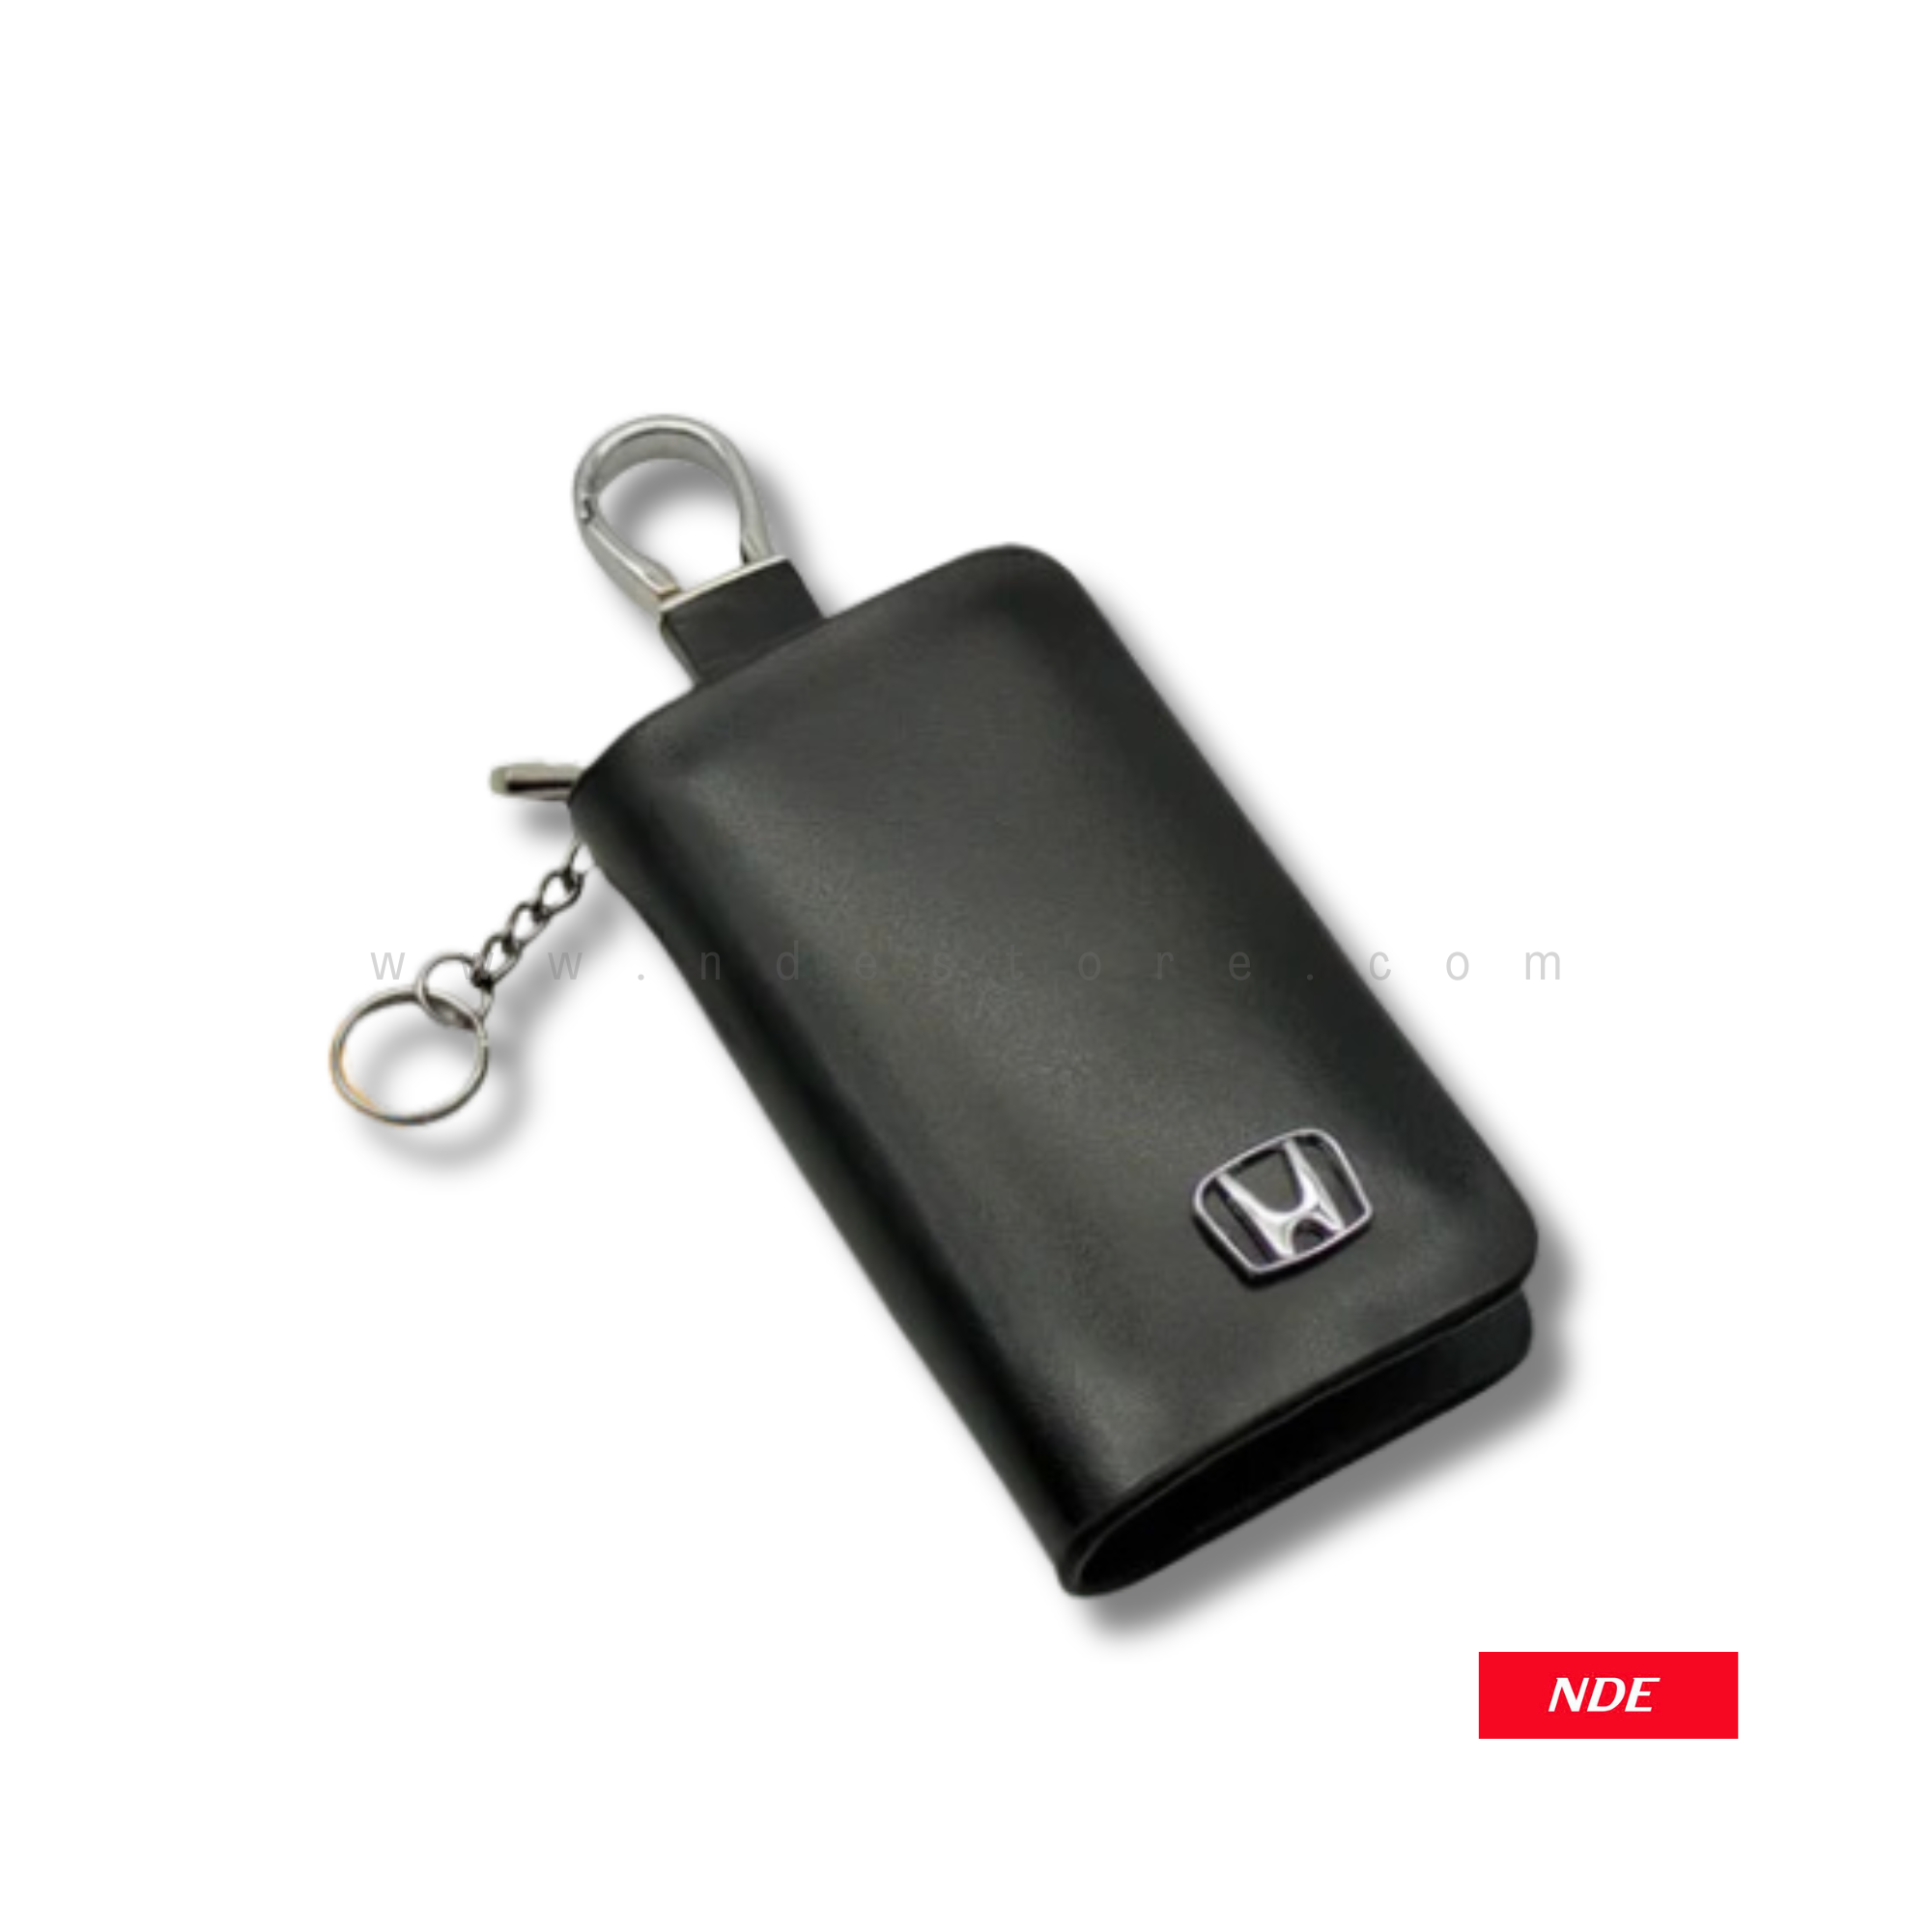 REMOTE COVER KEY POUCH PREMIUM LEATHER MATERIAL WITH HONDA LOGO (MADE IN CHINA)